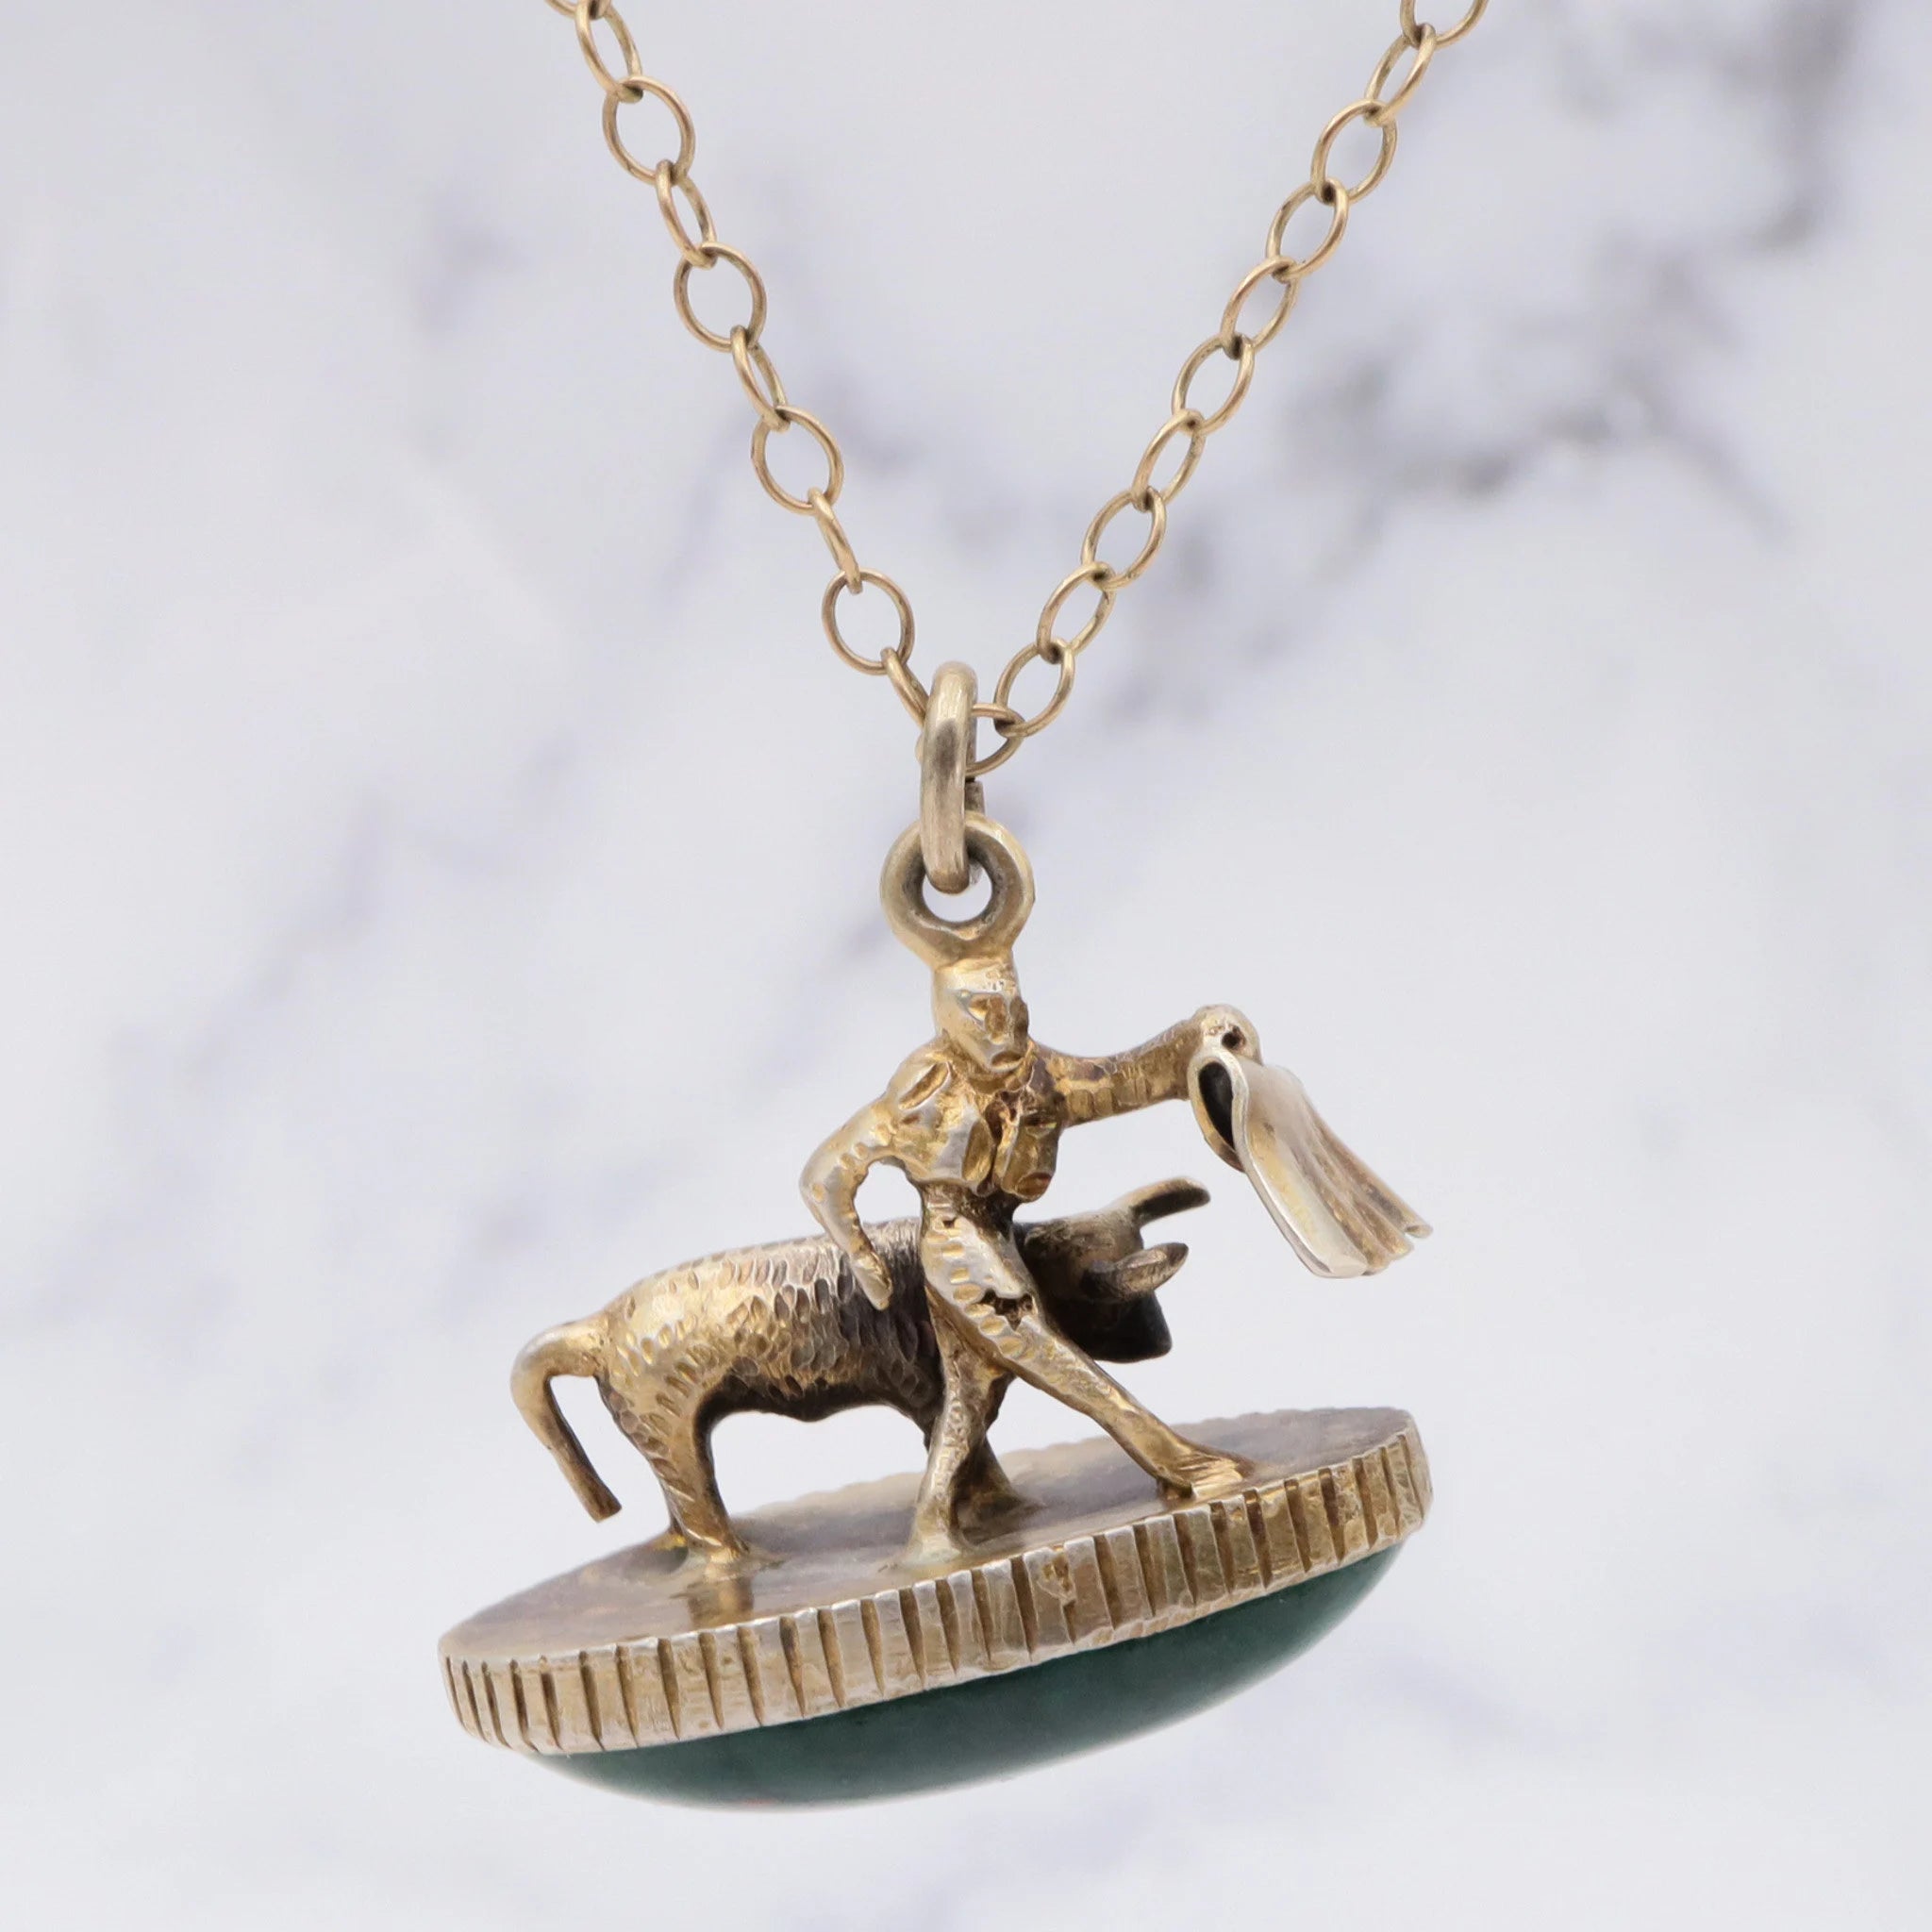 Antique gilt sterling figural matador & bull fob pendant with faux bloodstone